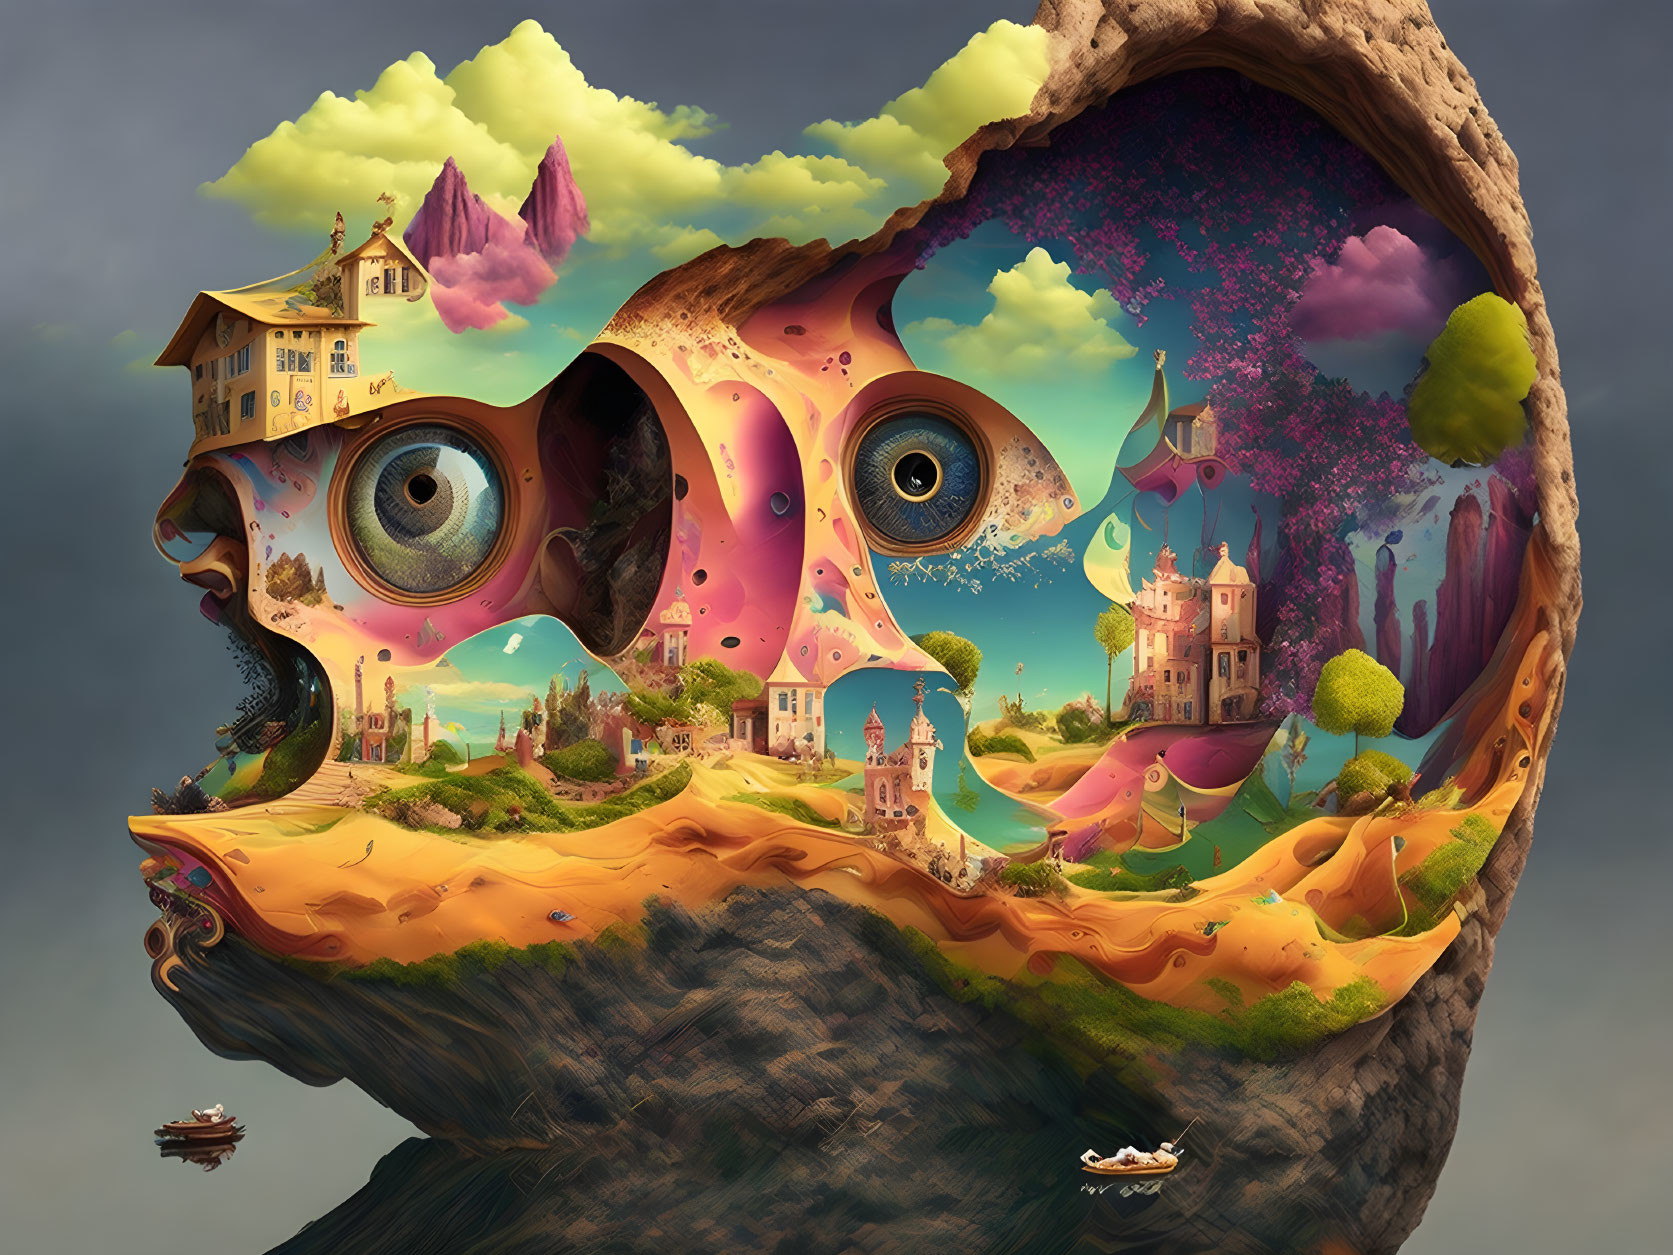 Surreal landscape with facial features: valleys, hills, whimsical houses, dramatic sky